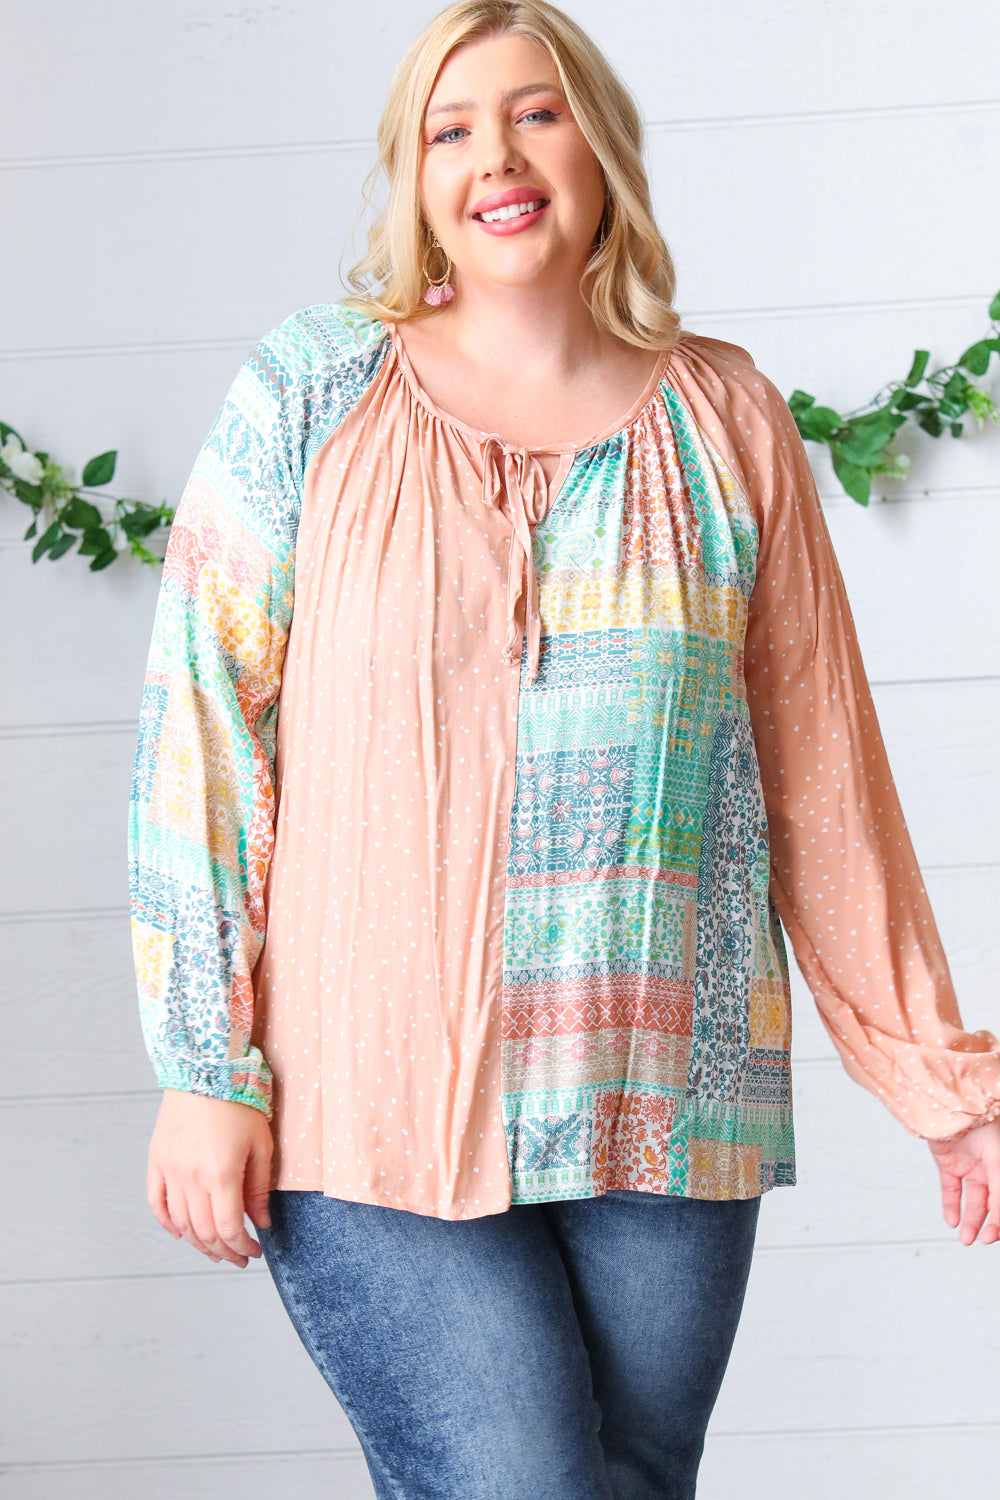 Front and Center Raglan Peasant Top